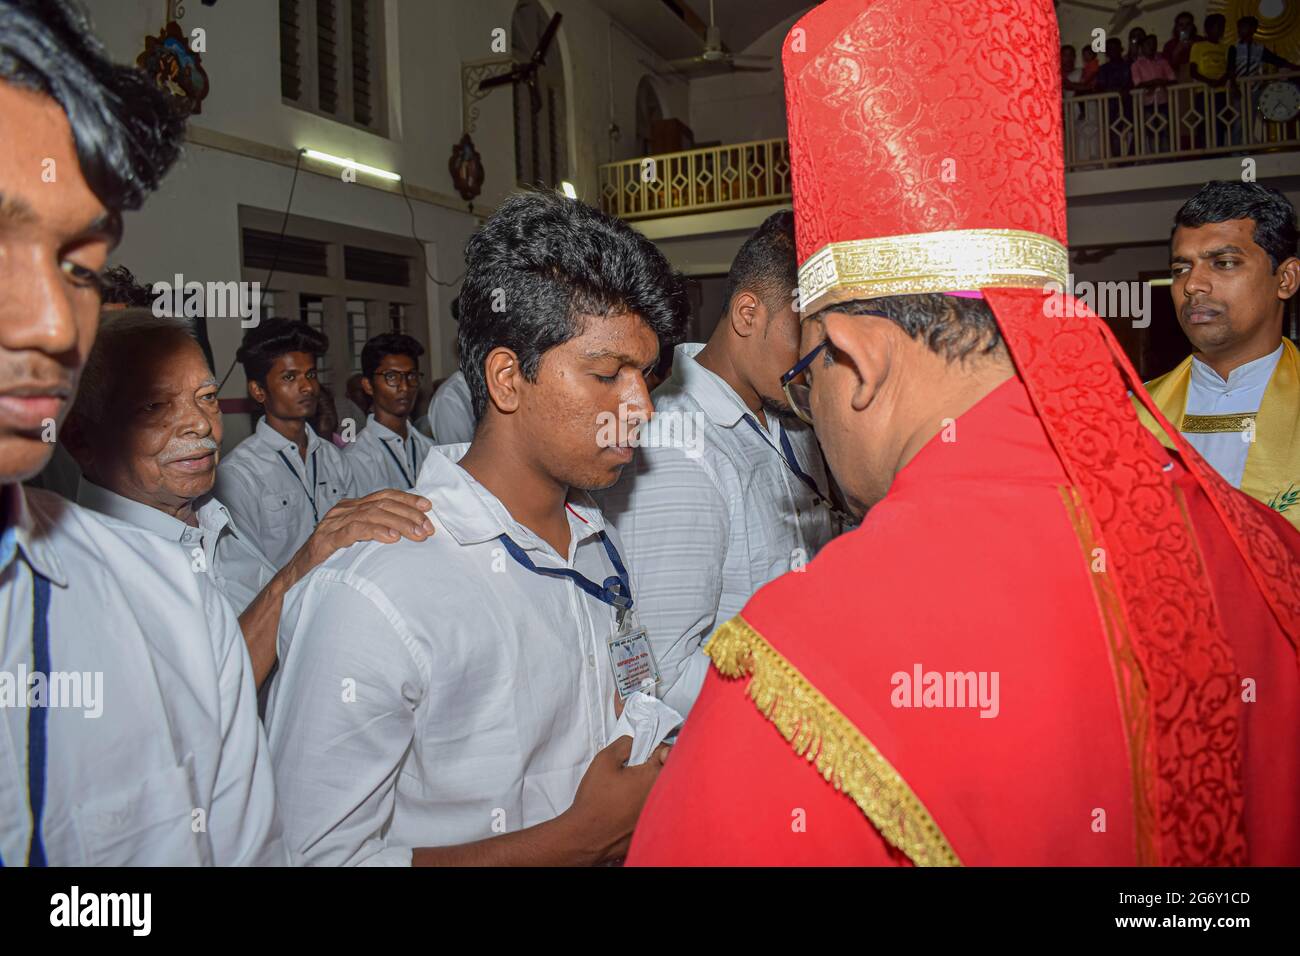 Bishop is giving confirmation sacrament to young teenagers. Stock Photo